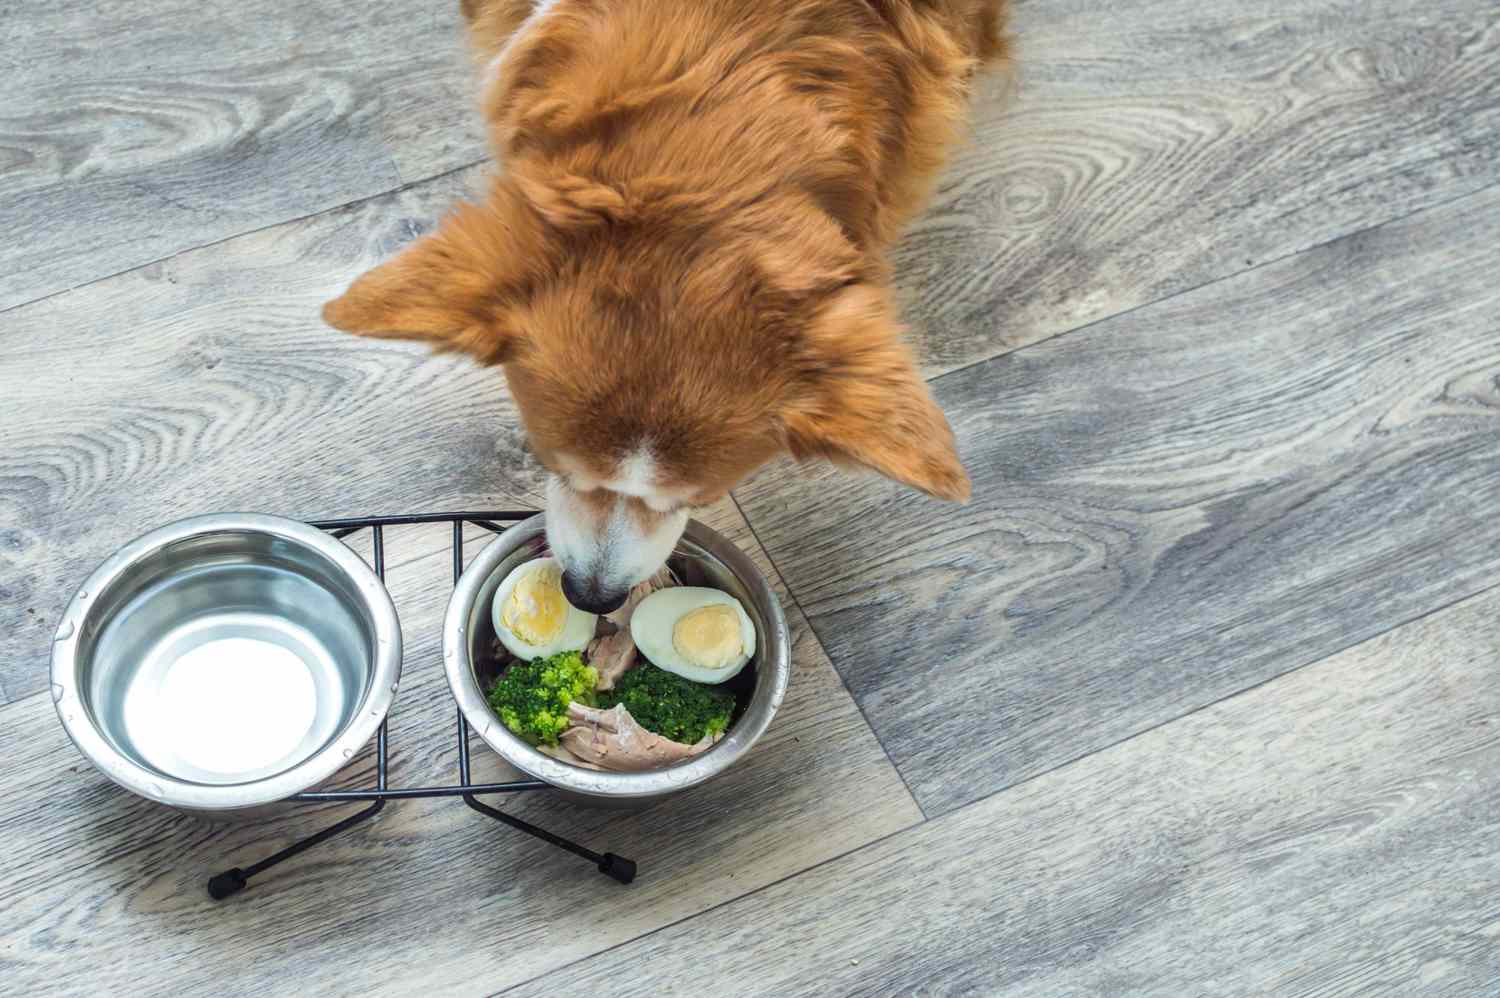 A dog happily eating from a bowl filled with food, including eggs.